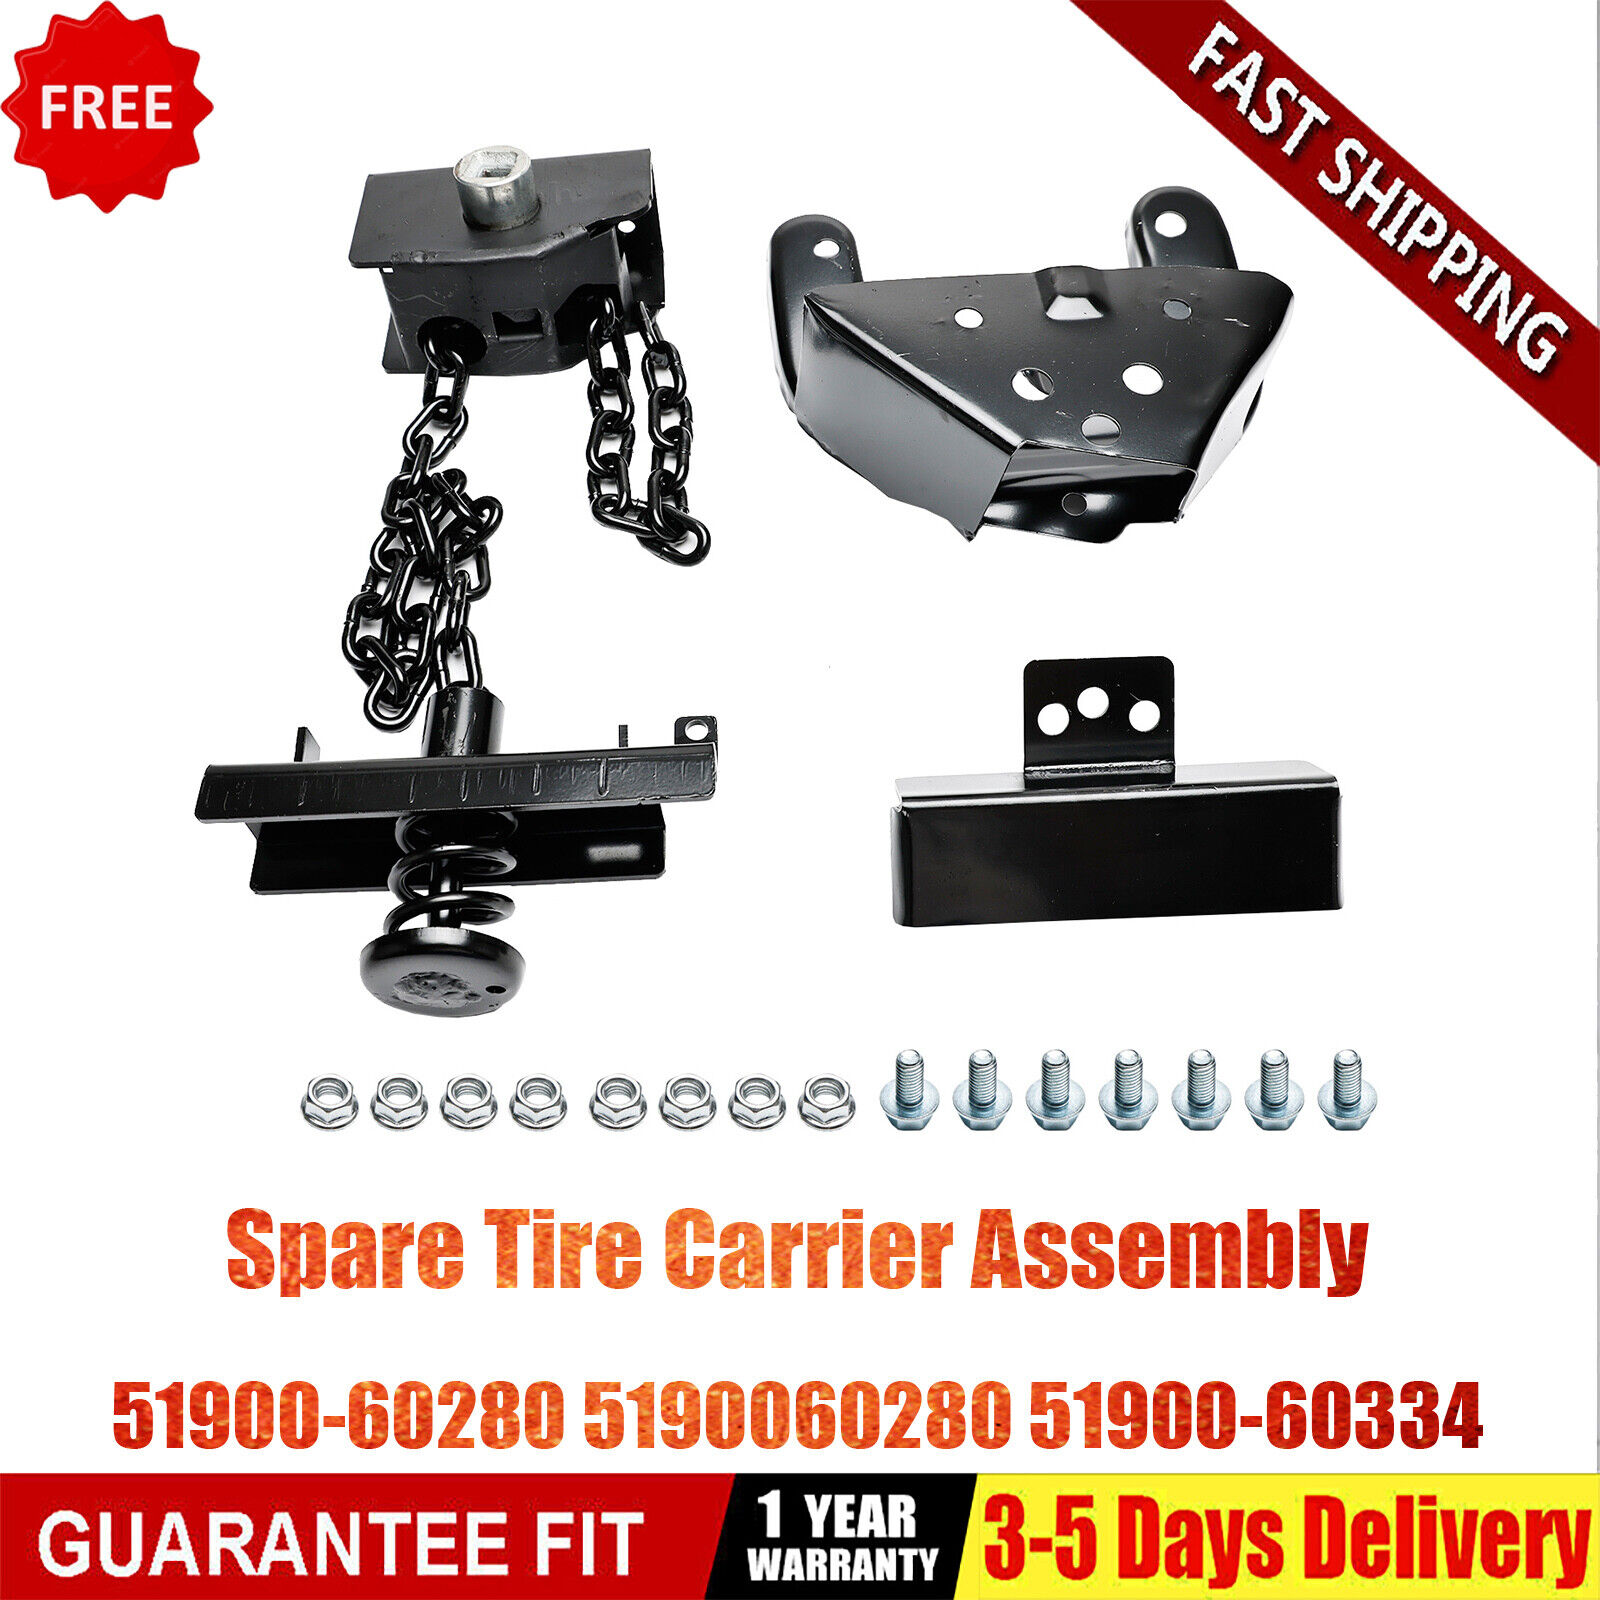 Spare Tire Carrier Assembly 51900-60280 Fits Toyota 4Runner & Lexus GX470 03-09